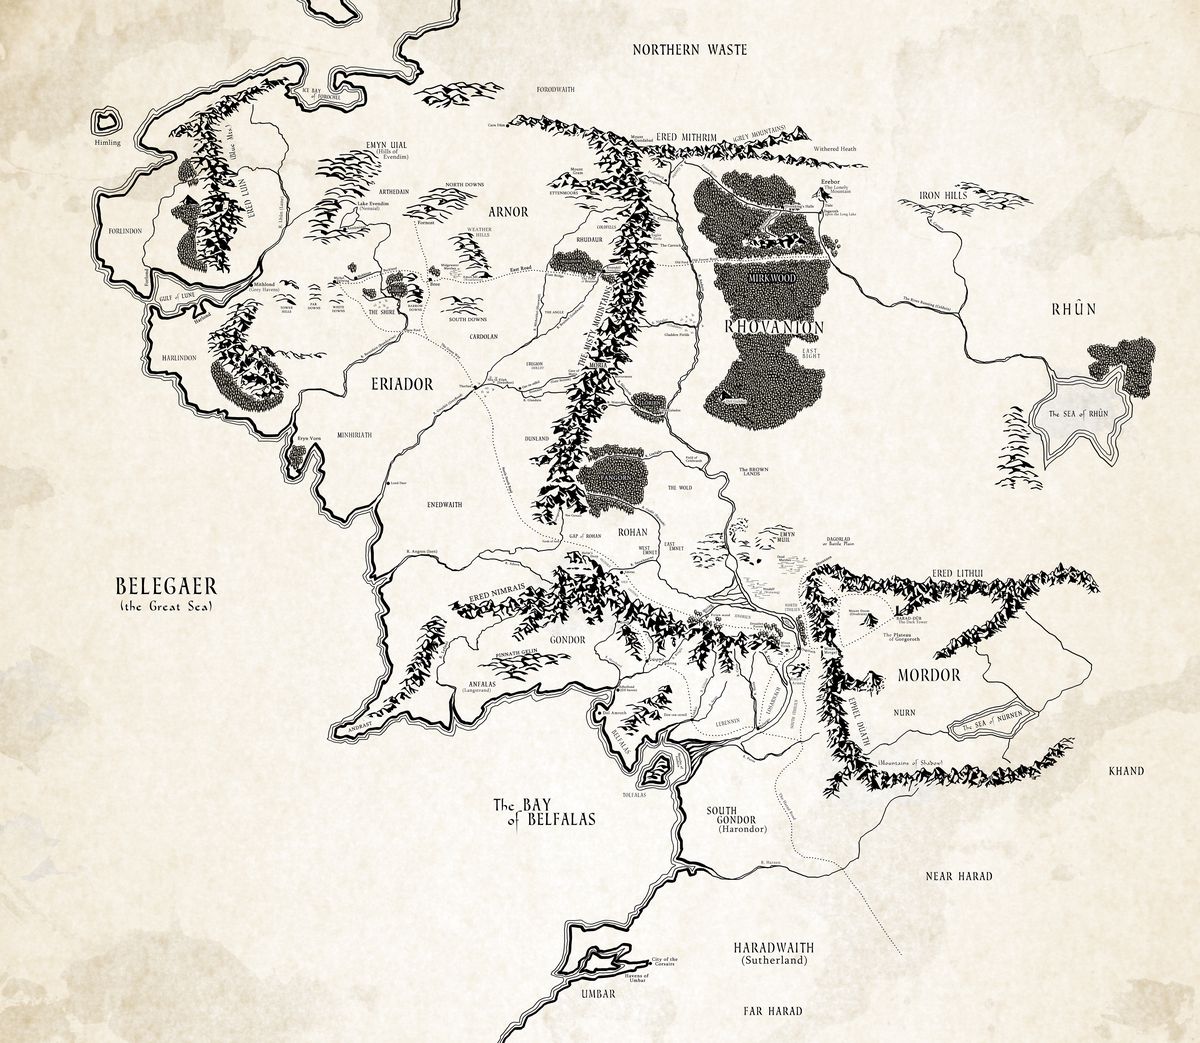 A giant map of Middle-earth reflecting locations from the movie trilogy like The Shire, Mines of Moria, and Mordor